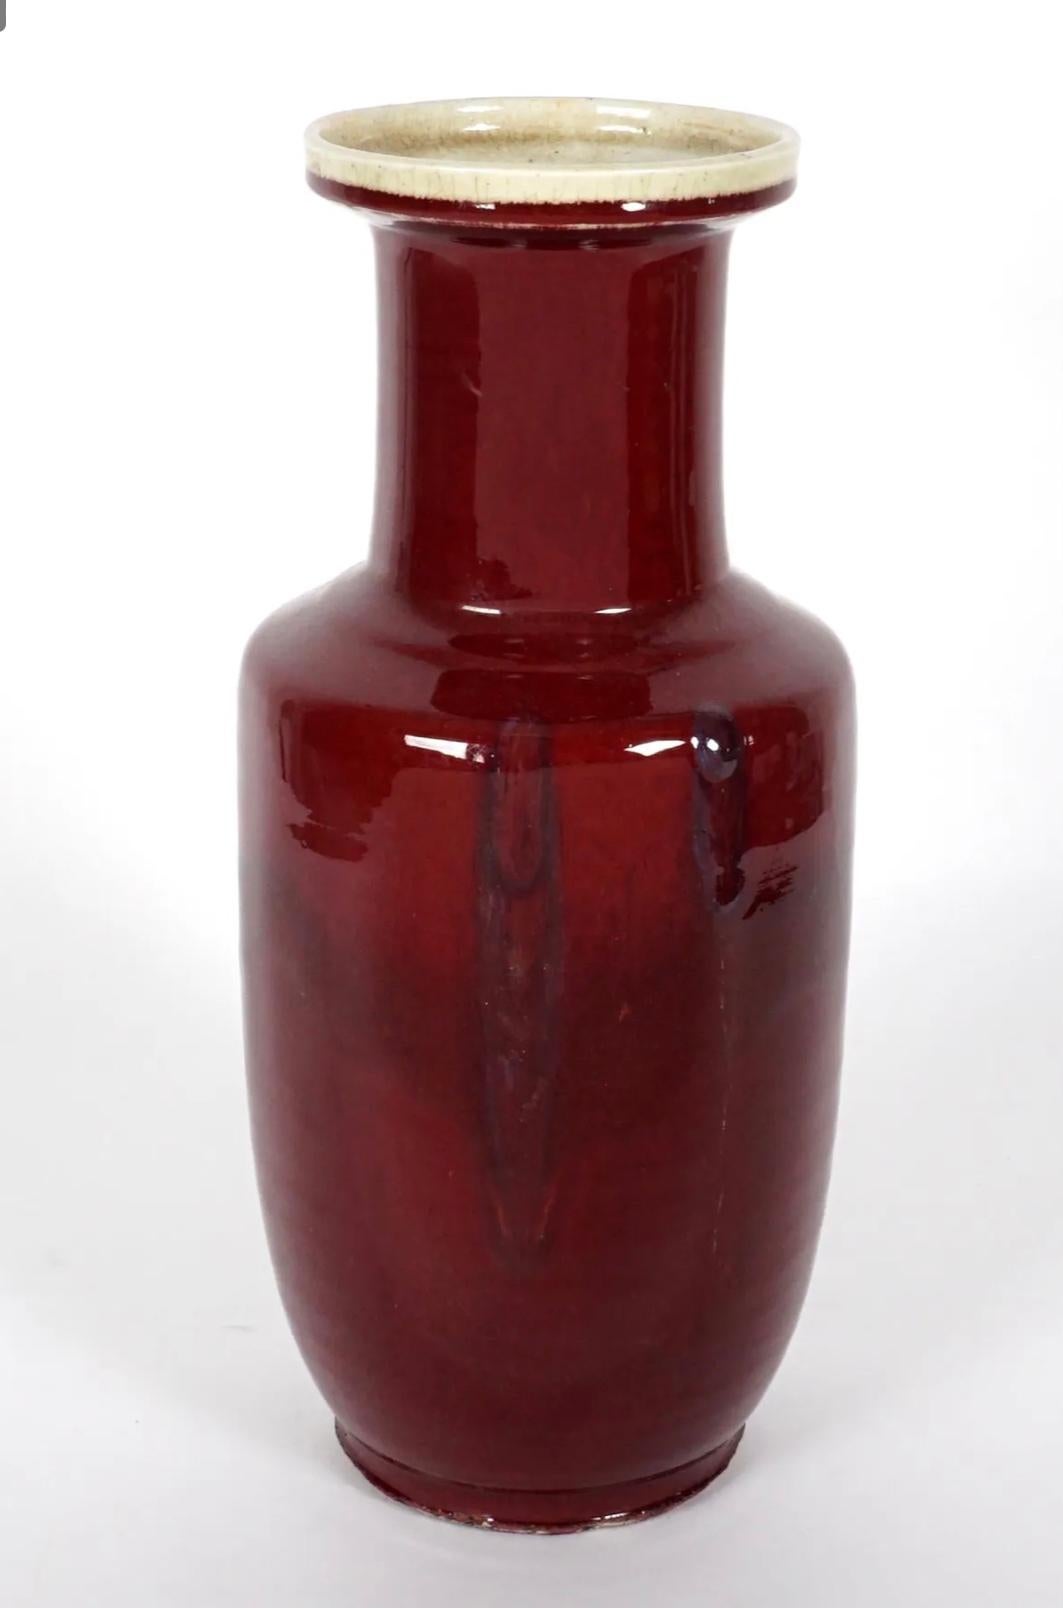 A large 19th Century Chinese Sang de Boeuf vase of baluster form.

The name ‘sang de boeuf’ refers to the color of the vase, which is French for ‘ox blood’. The difficult manufacturing process of this shade, which is achieved through an